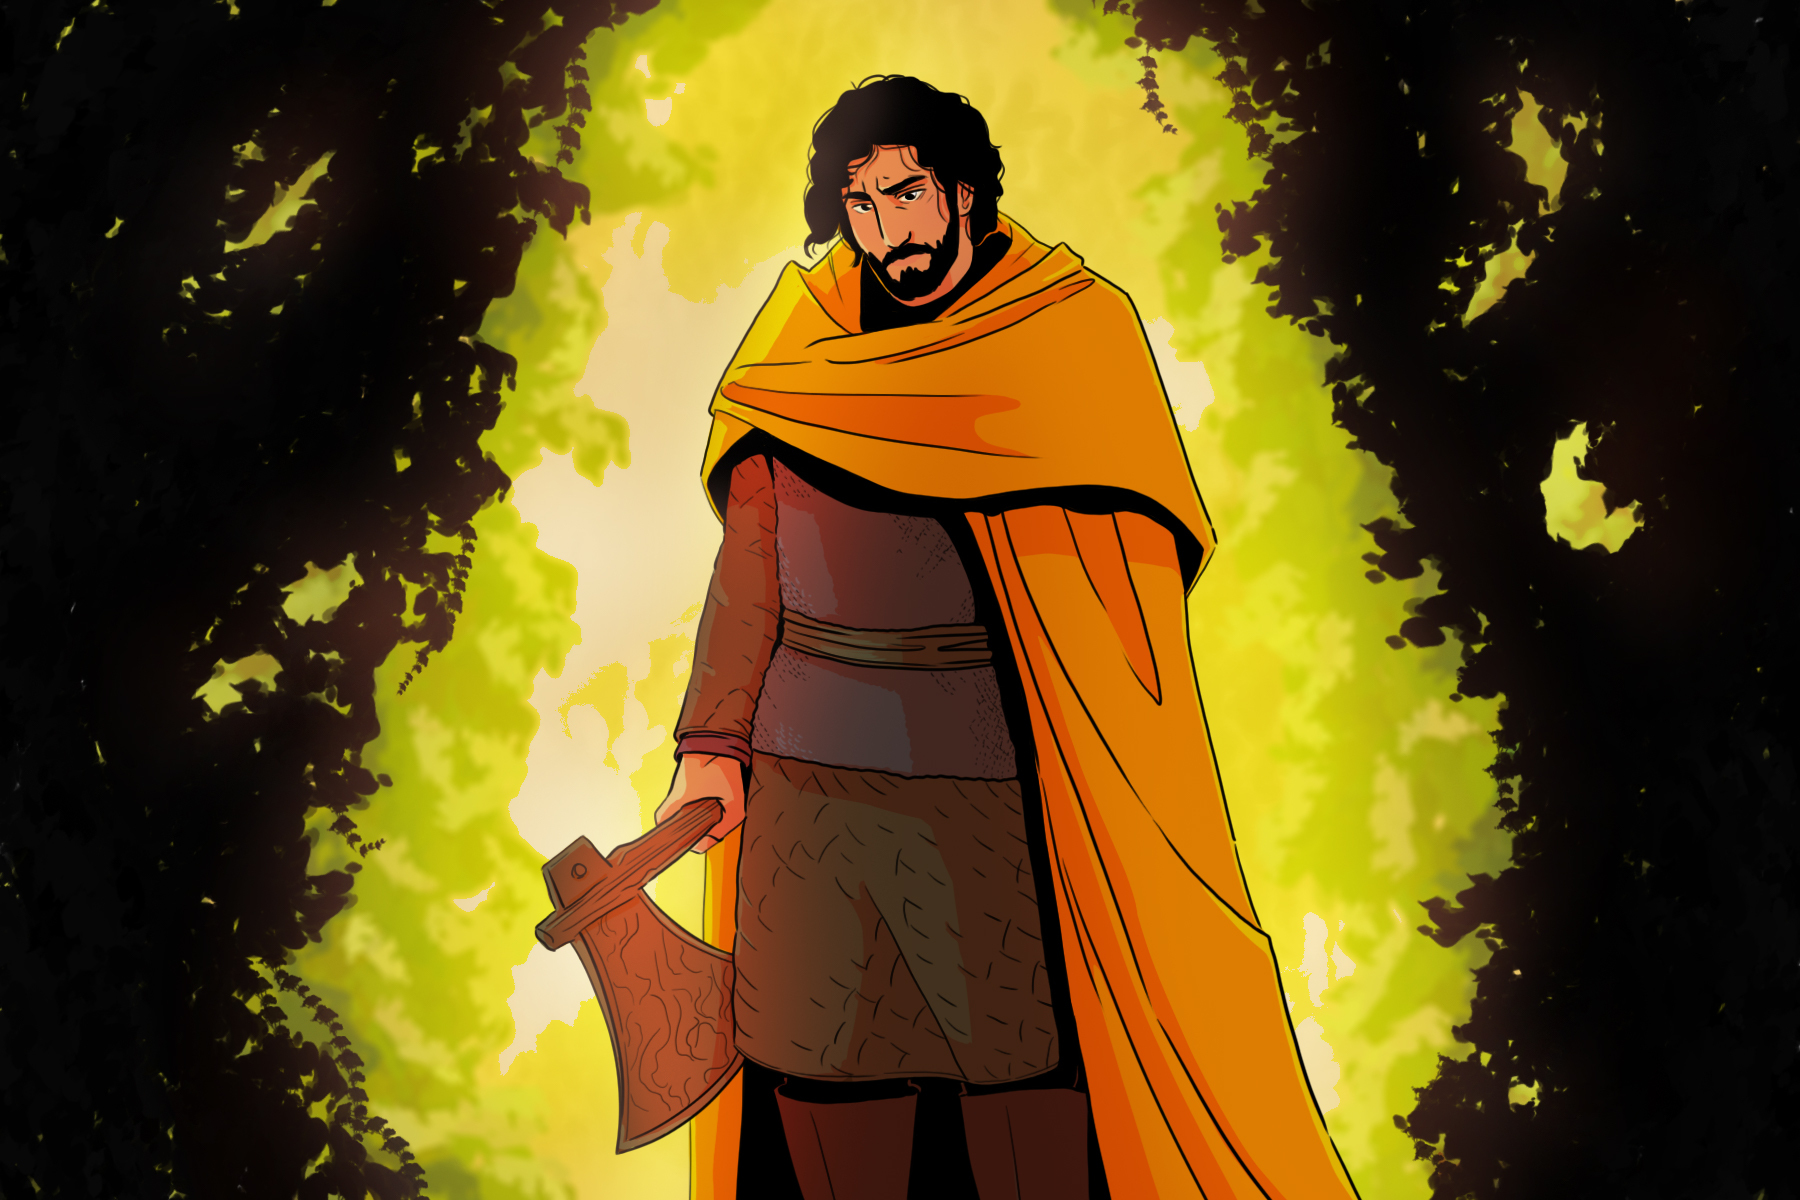 In an article about the Green Knight, Gawain stands in a yellow scarf, holding an axe, against a lush green and black background.